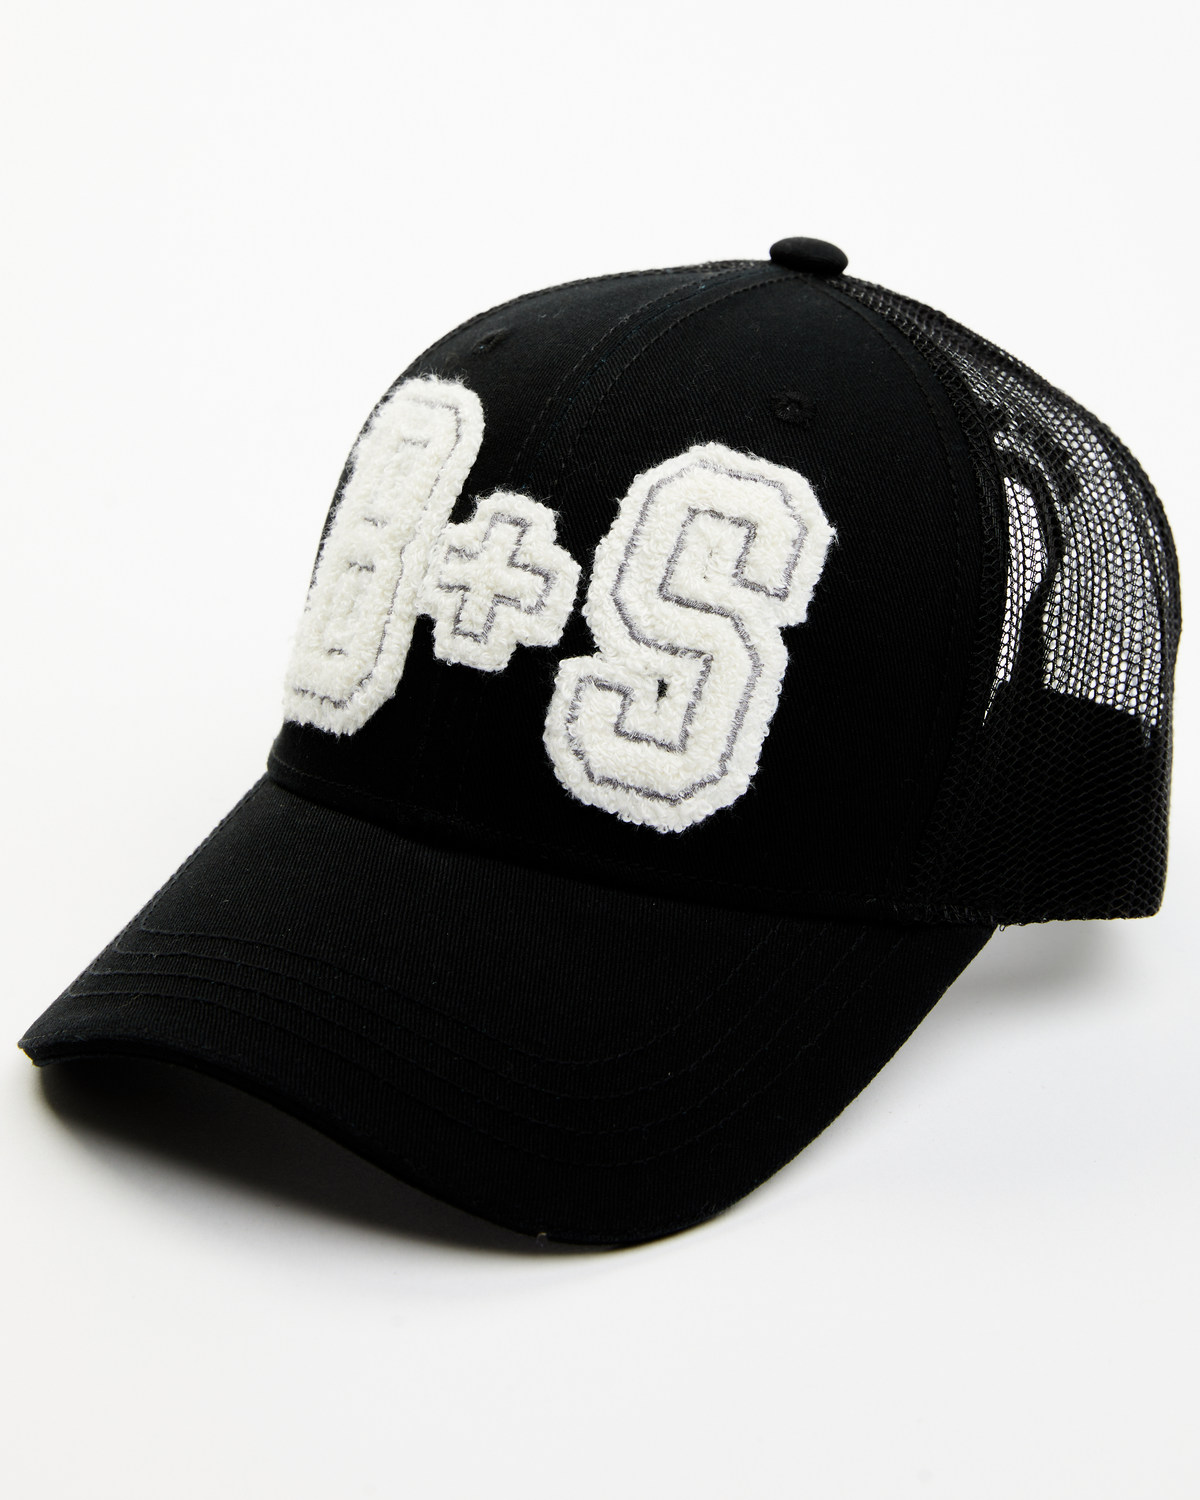 Brothers and Sons Men's B&S Varsity Patch Ball Cap